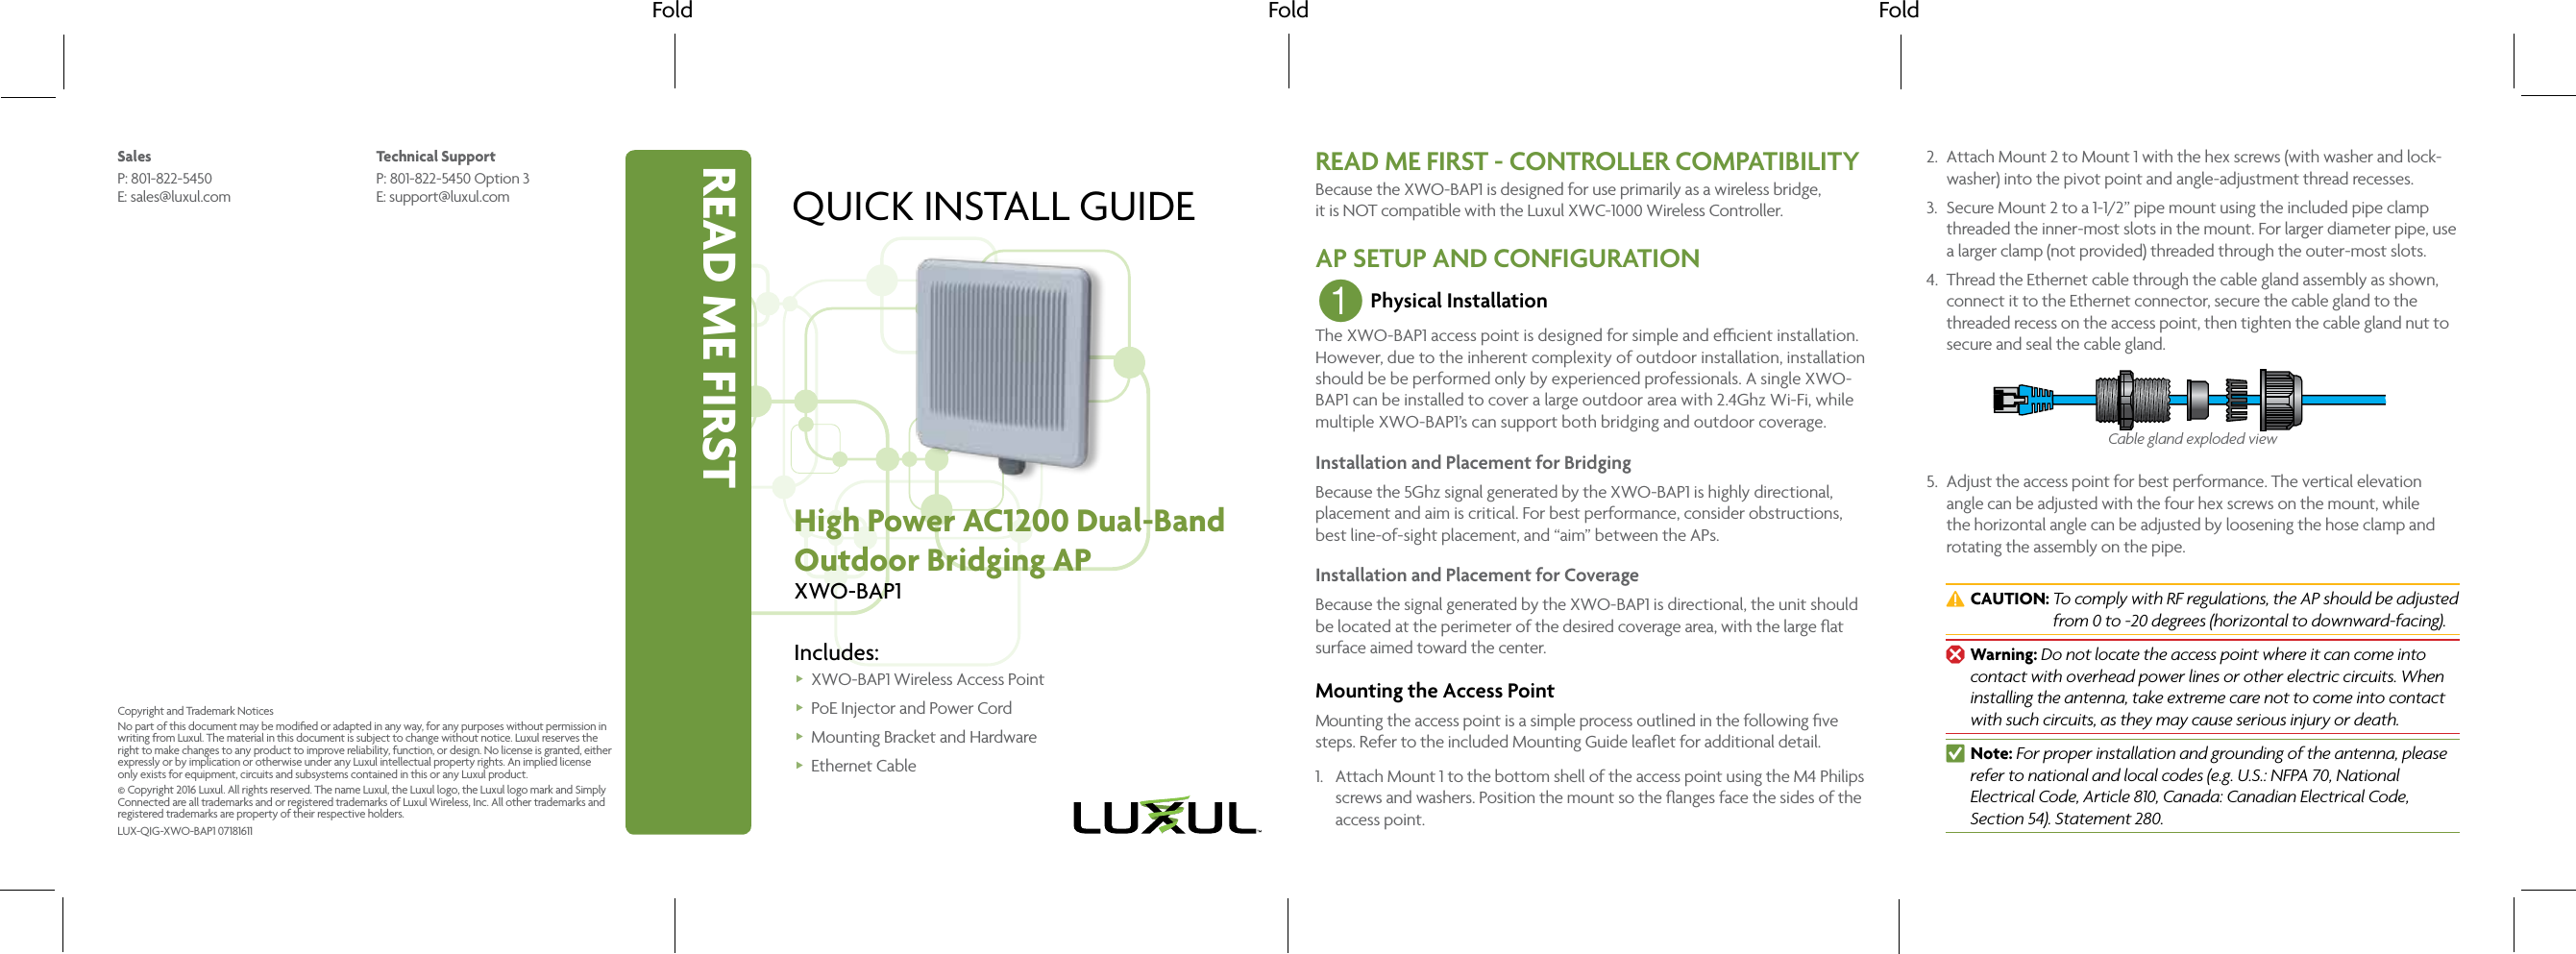 READ ME FIRSTFold Fold FoldQUICK INSTALL GUIDEHigh Power AC1200 Dual-BandOutdoor Bridging APXWO-BAP1Includes: XWO-BAP1 Wireless Access Point PoE Injector and Power Cord Mounting Bracket and Hardware Ethernet CableREAD ME FIRST - CONTROLLER COMPATIBILITYBecause the XWO-BAP1 is designed for use primarily as a wireless bridge,  it is NOT compatible with the Luxul XWC-1000 Wireless Controller.AP SETUP AND CONFIGURATION1 Physical InstallationThe XWO-BAP1 access point is designed for simple and ecient installation. However, due to the inherent complexity of outdoor installation, installation should be be performed only by experienced professionals. A single XWO-BAP1 can be installed to cover a large outdoor area with 2.4Ghz Wi-Fi, while multiple XWO-BAP1’s can support both bridging and outdoor coverage. Installation and Placement for BridgingBecause the 5Ghz signal generated by the XWO-BAP1 is highly directional, placement and aim is critical. For best performance, consider obstructions, best line-of-sight placement, and “aim” between the APs.Installation and Placement for CoverageBecause the signal generated by the XWO-BAP1 is directional, the unit should be located at the perimeter of the desired coverage area, with the large ﬂat surface aimed toward the center.Mounting the Access PointMounting the access point is a simple process outlined in the following ﬁve steps. Refer to the included Mounting Guide leaﬂet for additional detail.1.  Attach Mount 1 to the bottom shell of the access point using the M4 Philips screws and washers. Position the mount so the ﬂanges face the sides of the access point.2.  Attach Mount 2 to Mount 1 with the hex screws (with washer and lock-washer) into the pivot point and angle-adjustment thread recesses.3.  Secure Mount 2 to a 1-1/2” pipe mount using the included pipe clamp threaded the inner-most slots in the mount. For larger diameter pipe, use a larger clamp (not provided) threaded through the outer-most slots.4.  Thread the Ethernet cable through the cable gland assembly as shown, connect it to the Ethernet connector, secure the cable gland to the threaded recess on the access point, then tighten the cable gland nut to secure and seal the cable gland. Cable gland exploded view5.  Adjust the access point for best performance. The vertical elevation angle can be adjusted with the four hex screws on the mount, while the horizontal angle can be adjusted by loosening the hose clamp and rotating the assembly on the pipe.  cCAUTION:  To comply with RF regulations, the AP should be adjusted from 0 to -20 degrees (horizontal to downward-facing). wWarning: Do not locate the access point where it can come into contact with overhead power lines or other electric circuits. When installing the antenna, take extreme care not to come into contact with such circuits, as they may cause serious injury or death. nNote: For proper installation and grounding of the antenna, please refer to national and local codes (e.g. U.S.: NFPA 70, National Electrical Code, Article 810, Canada: Canadian Electrical Code, Section 54). Statement 280.SalesP: 801-822-5450 E: sales@luxul.comTechnical SupportP: 801-822-5450 Option 3 E: support@luxul.comLUX-QIG-XWO-BAP1 07181611Copyright and Trademark NoticesNo part of this document may be modiﬁed or adapted in any way, for any purposes without permission in writing from Luxul. The material in this document is subject to change without notice. Luxul reserves the right to make changes to any product to improve reliability, function, or design. No license is granted, either expressly or by implication or otherwise under any Luxul intellectual property rights. An implied license only exists for equipment, circuits and subsystems contained in this or any Luxul product.© Copyright 2016 Luxul. All rights reserved. The name Luxul, the Luxul logo, the Luxul logo mark and Simply Connected are all trademarks and or registered trademarks of Luxul Wireless, Inc. All other trademarks and registered trademarks are property of their respective holders.